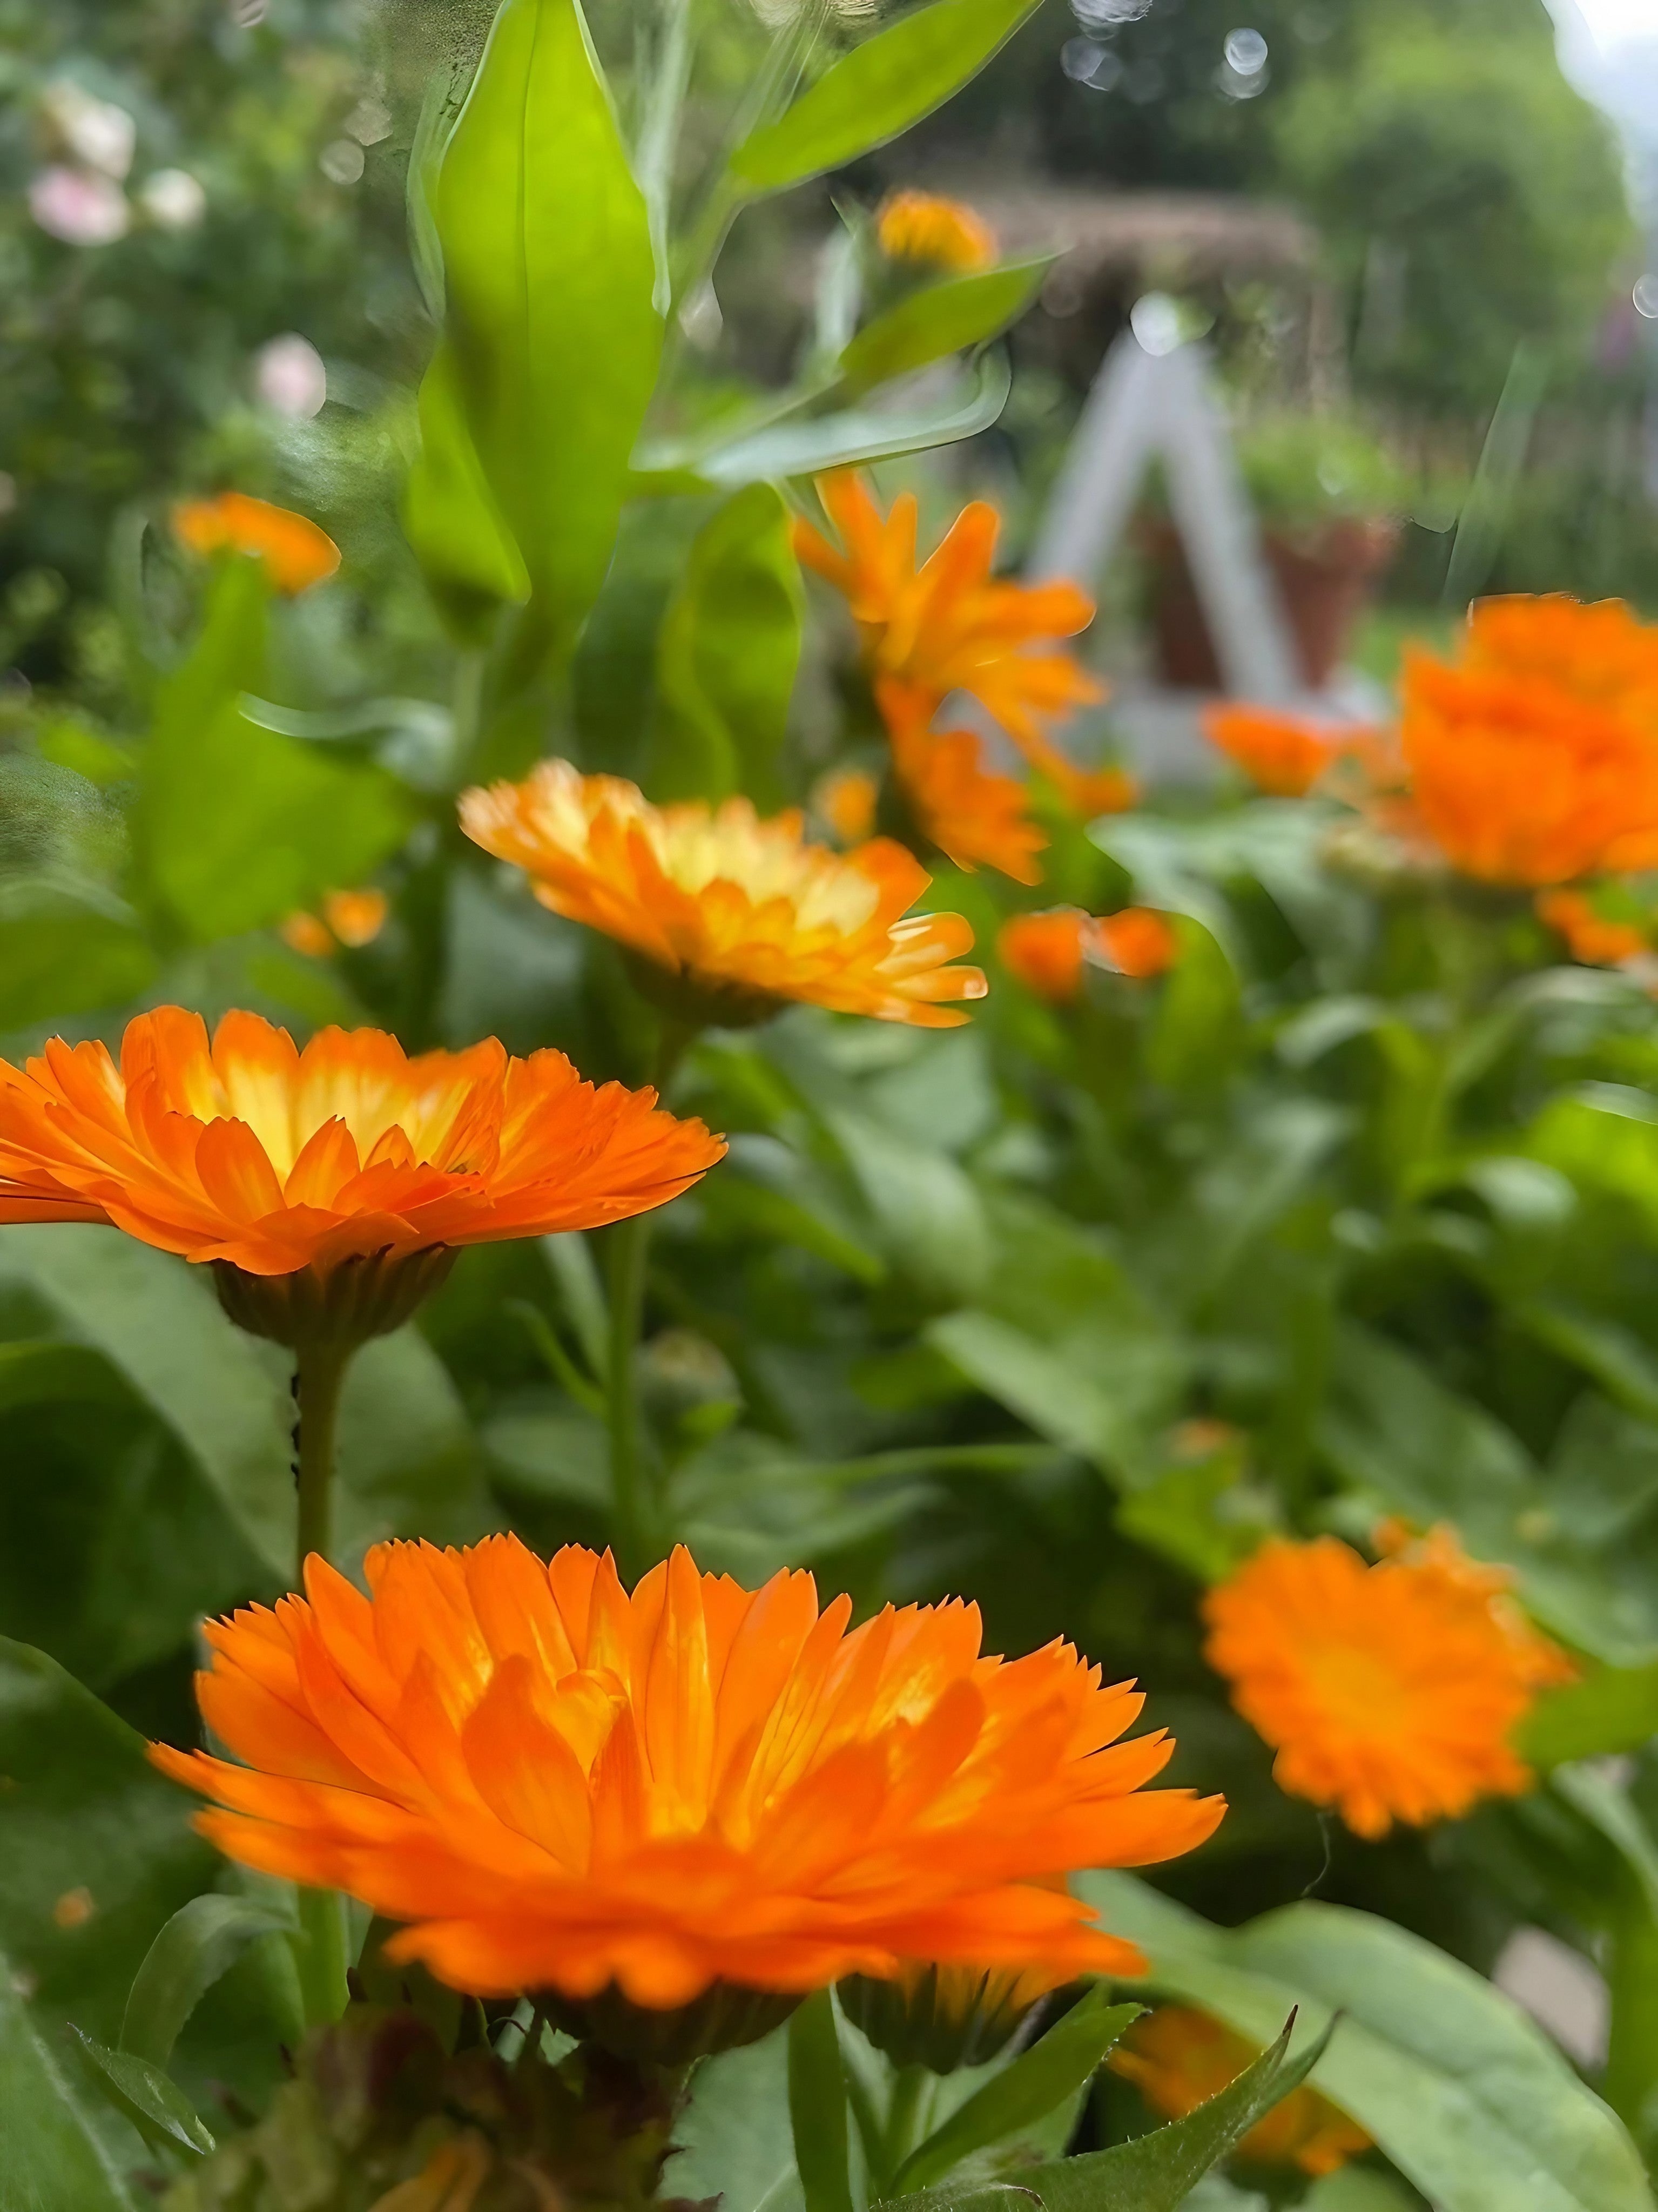 Vibrant Calendula Oopsy Daisy blossoms under the sunlight in a garden